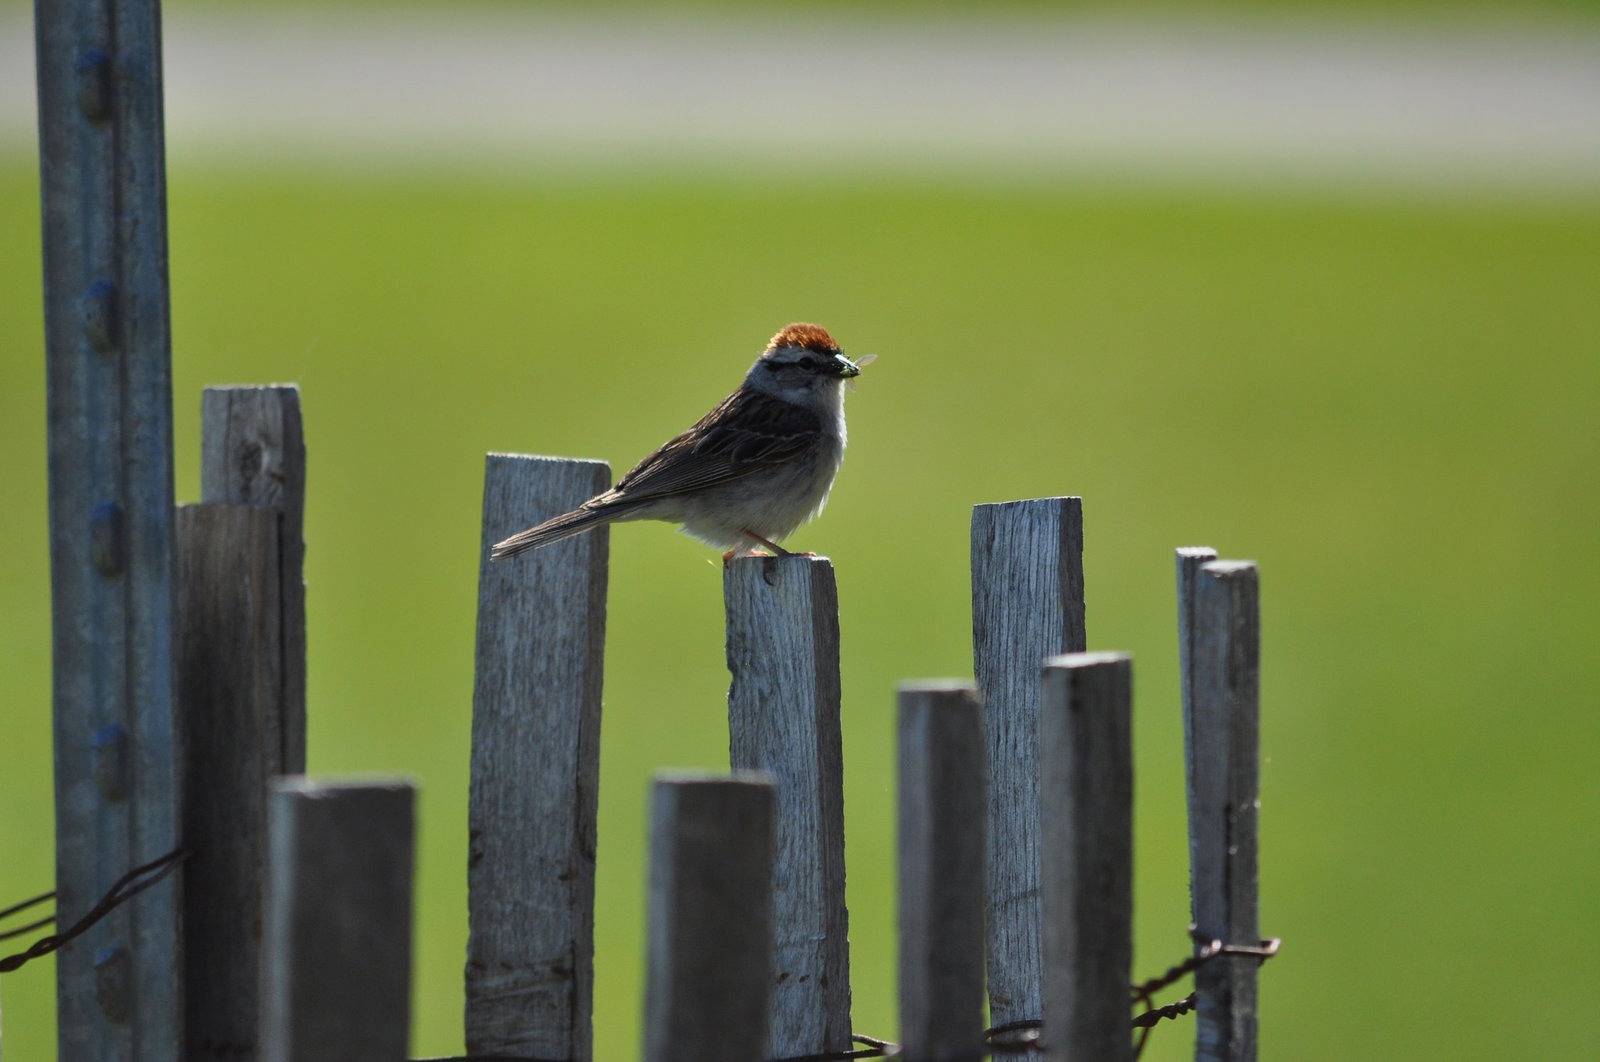 Chipping Sparrow with a snack